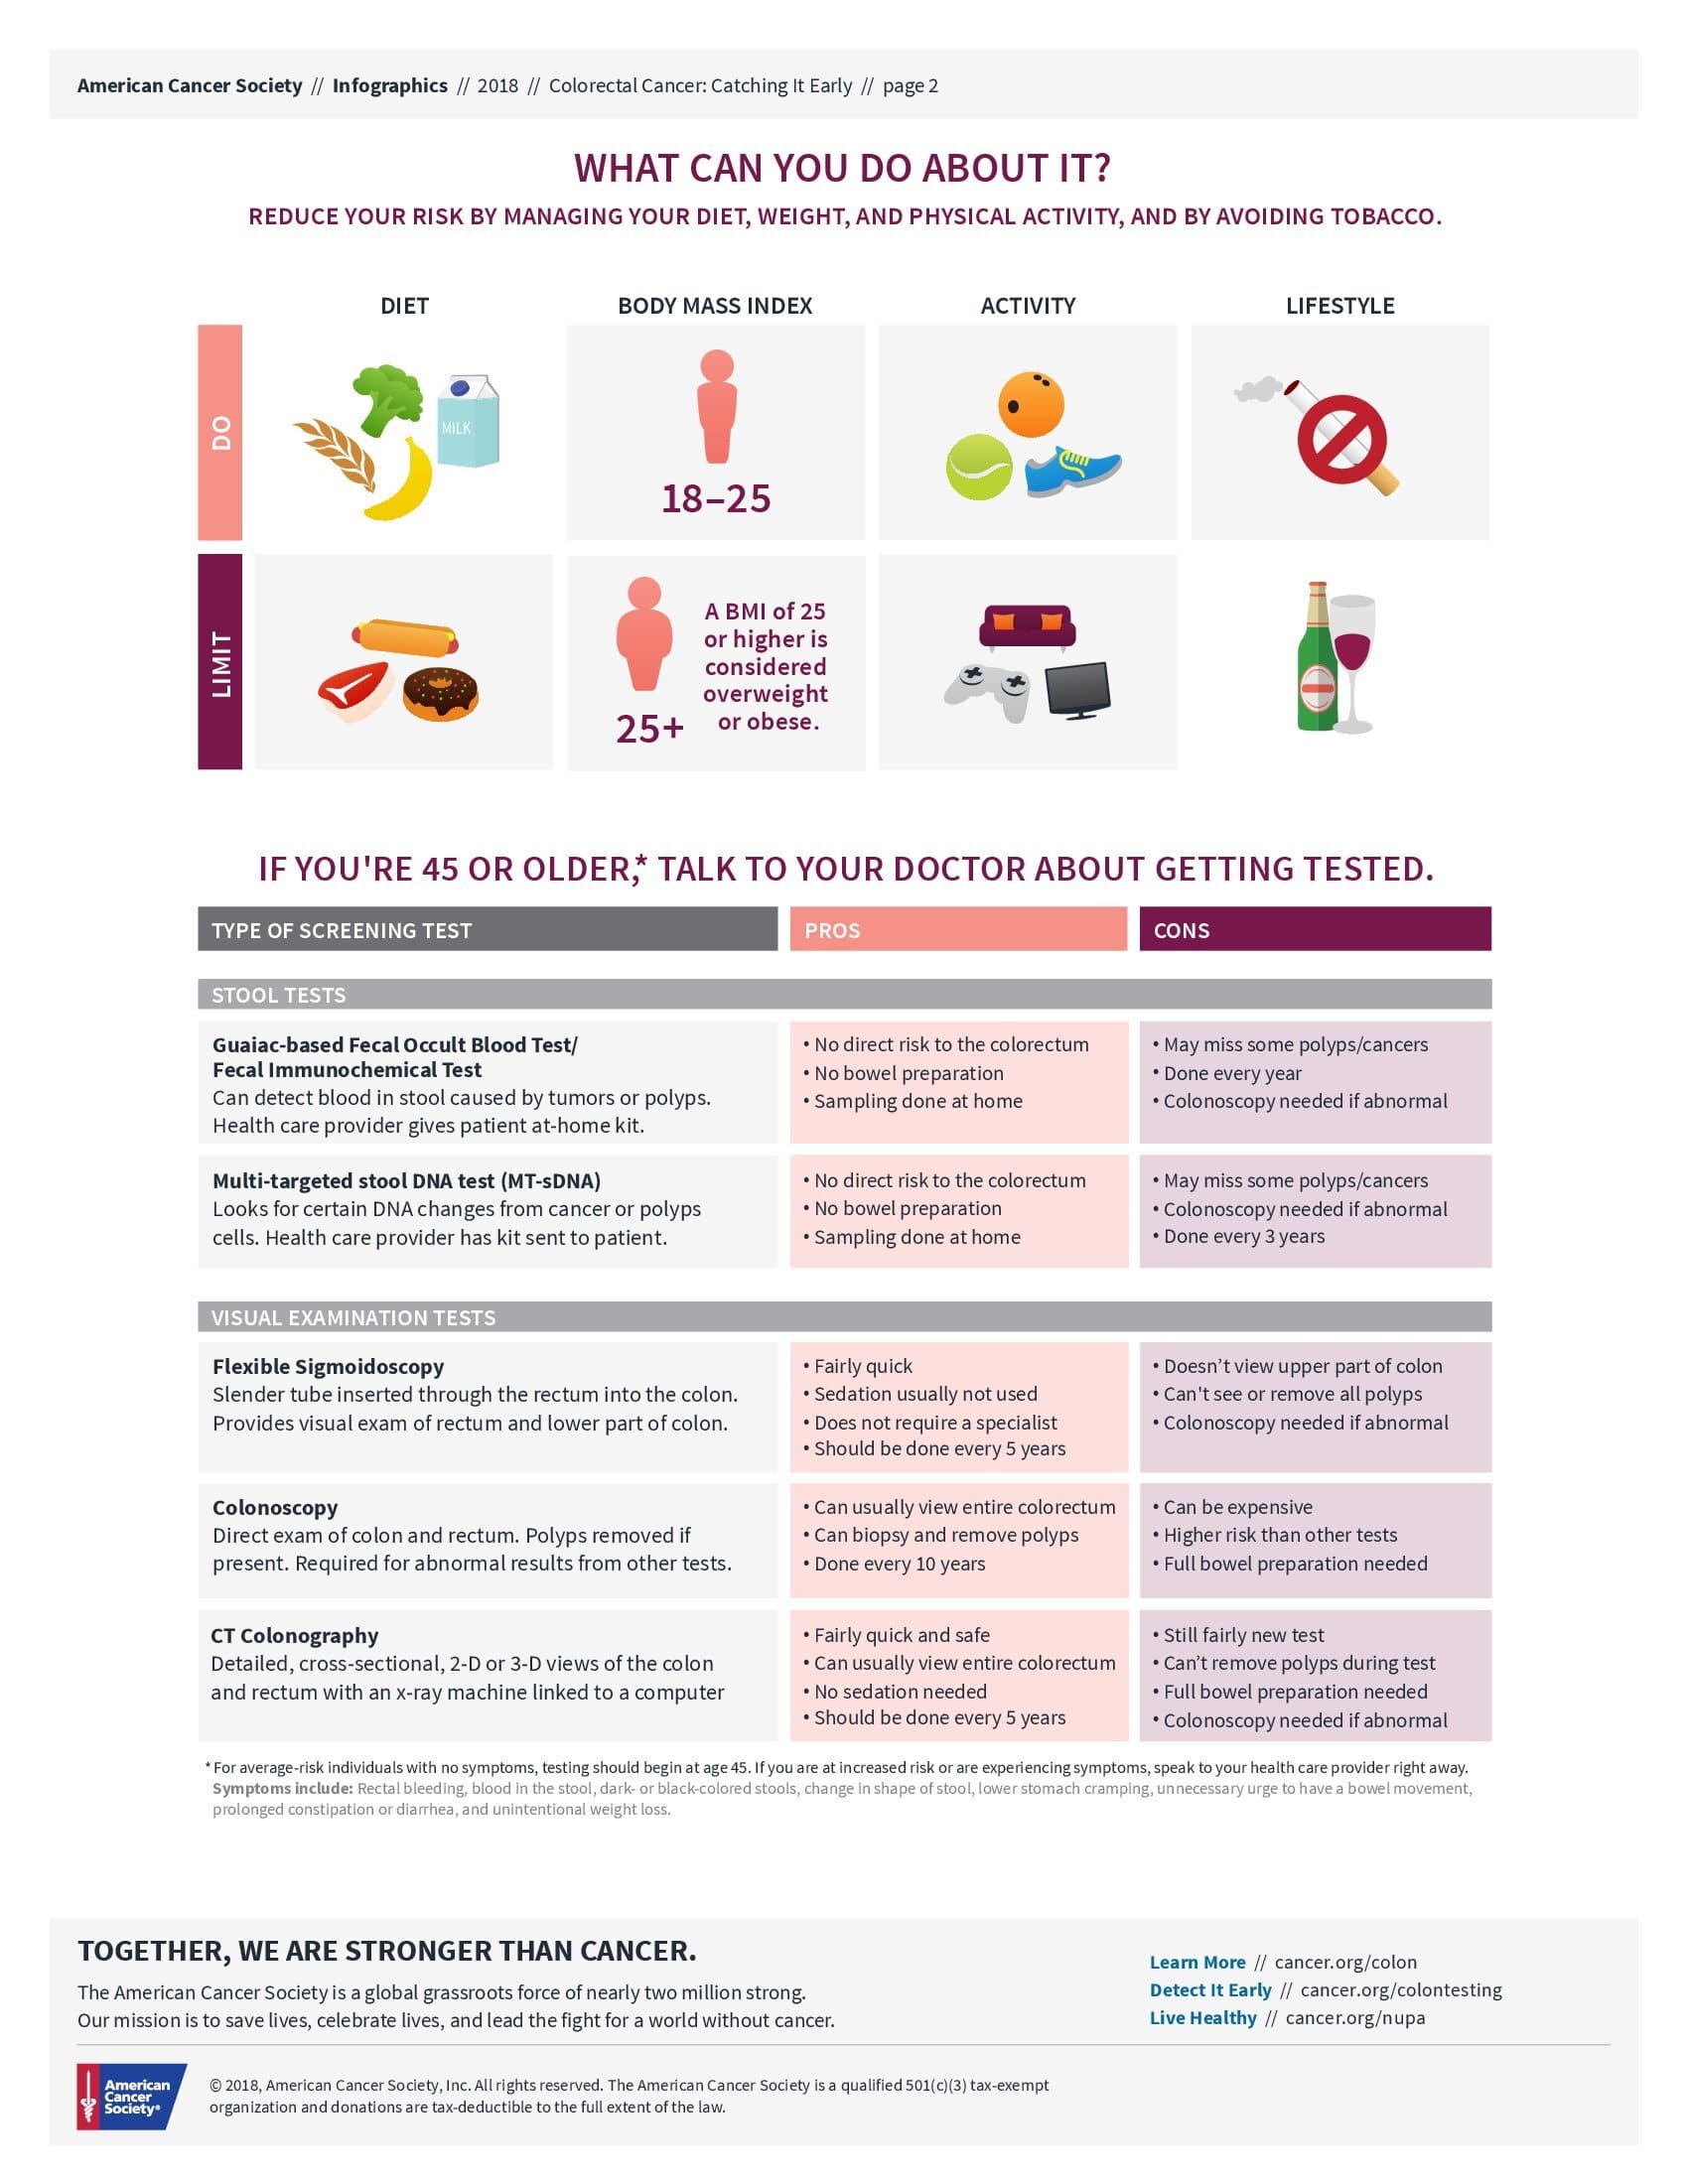 colorectal-cancer-catching-it-early-infographic-print_00002.jpg